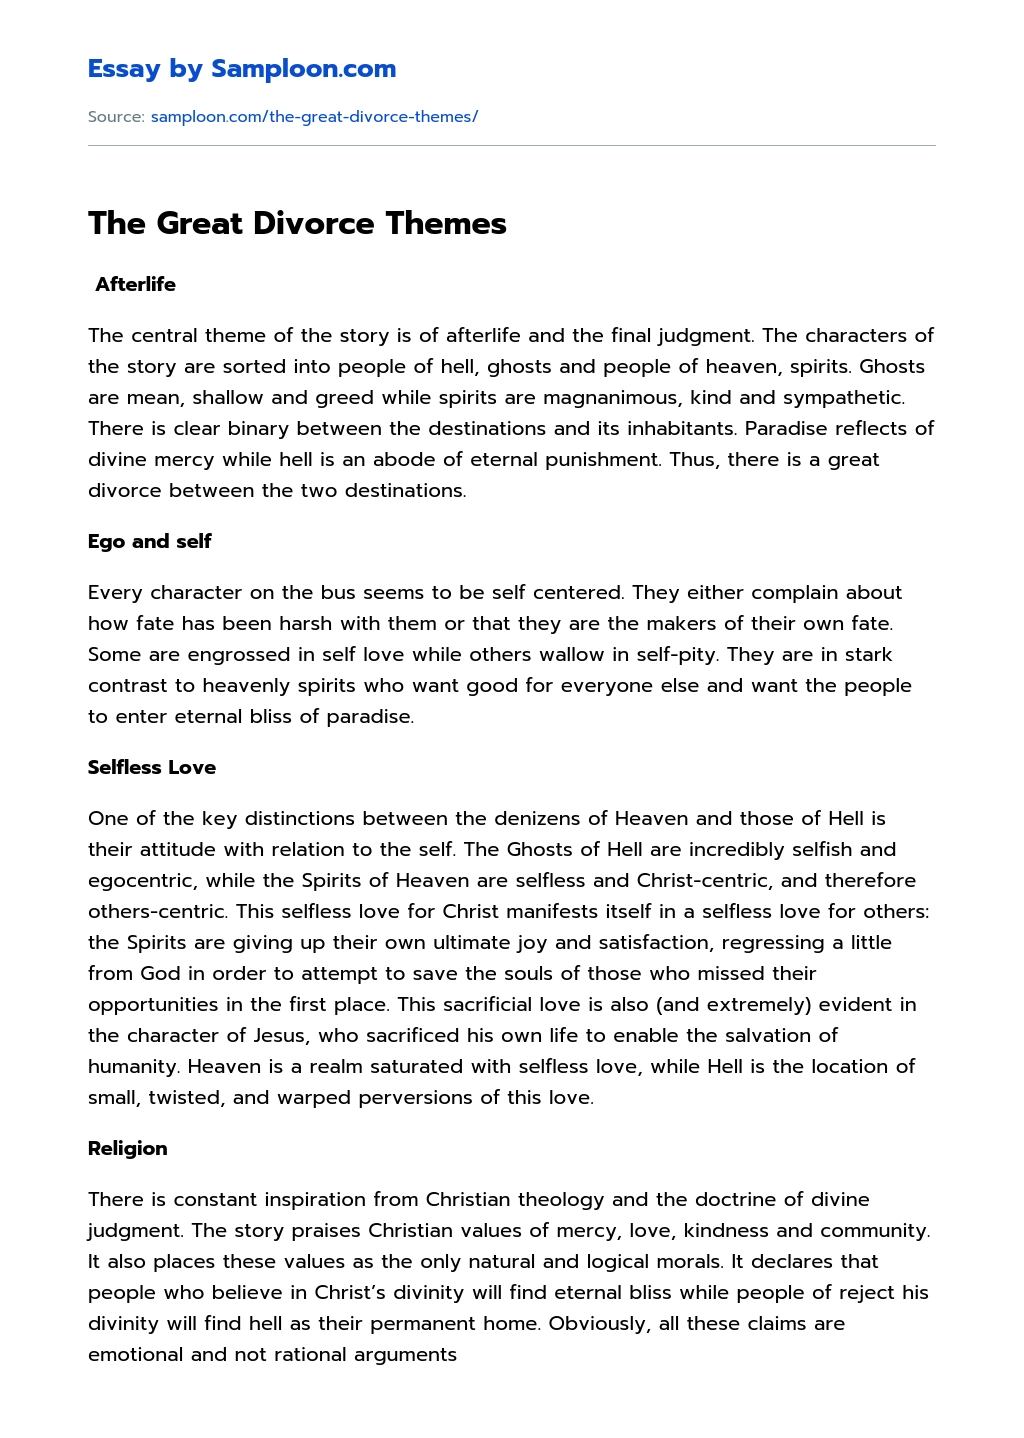 The Great Divorce Themes essay